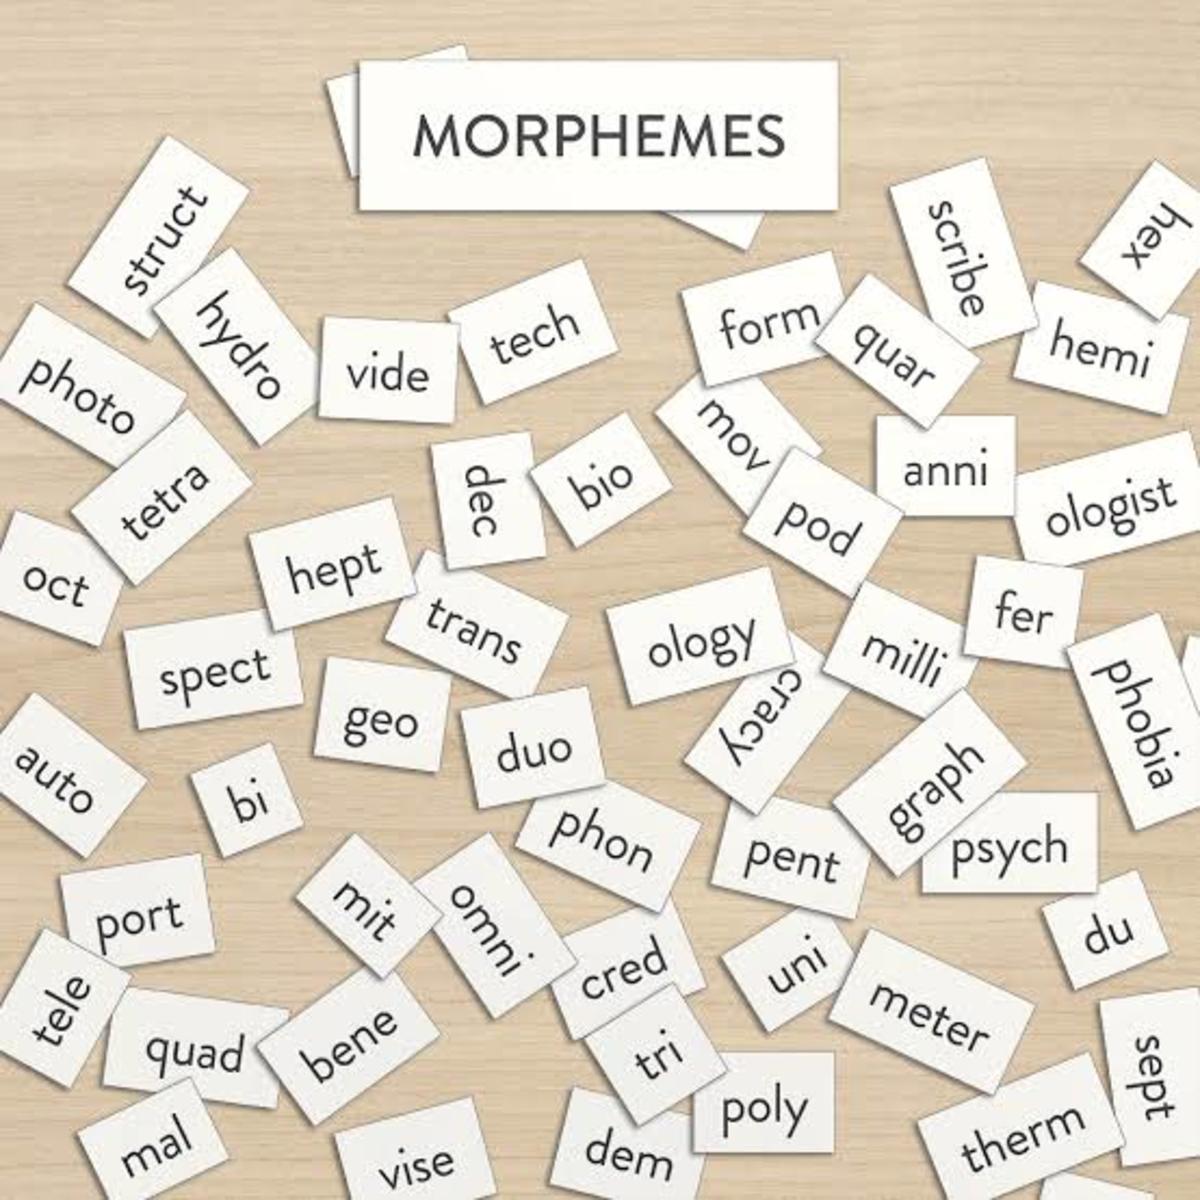 types-and-meaning-of-morphemes